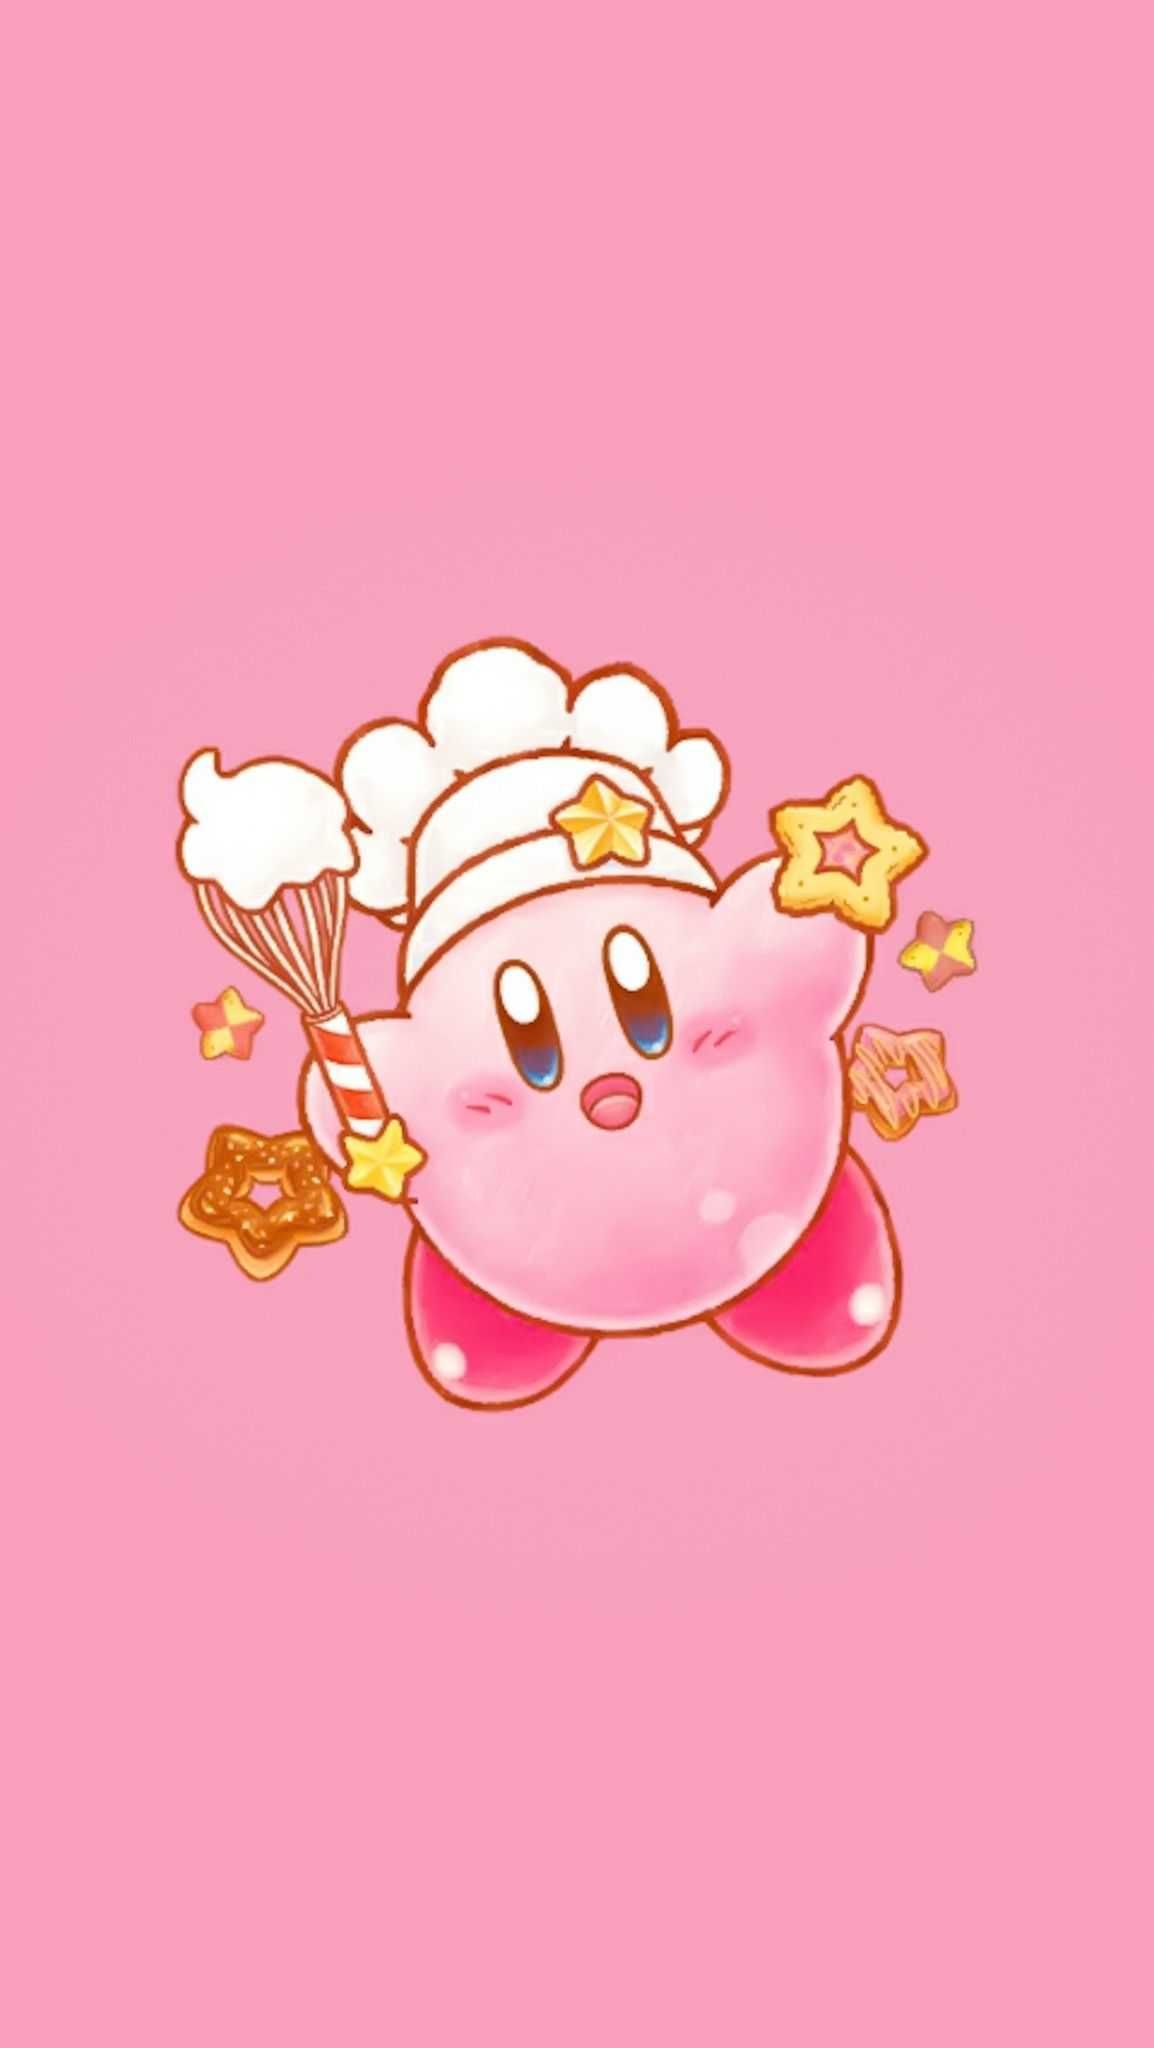 Cute Kirby Wallpaper Discover More Games, Kirby Wallpaper. 90844 Cute Kirby Wallpaper 4. Kirby Art, Kirby Character, Kirby